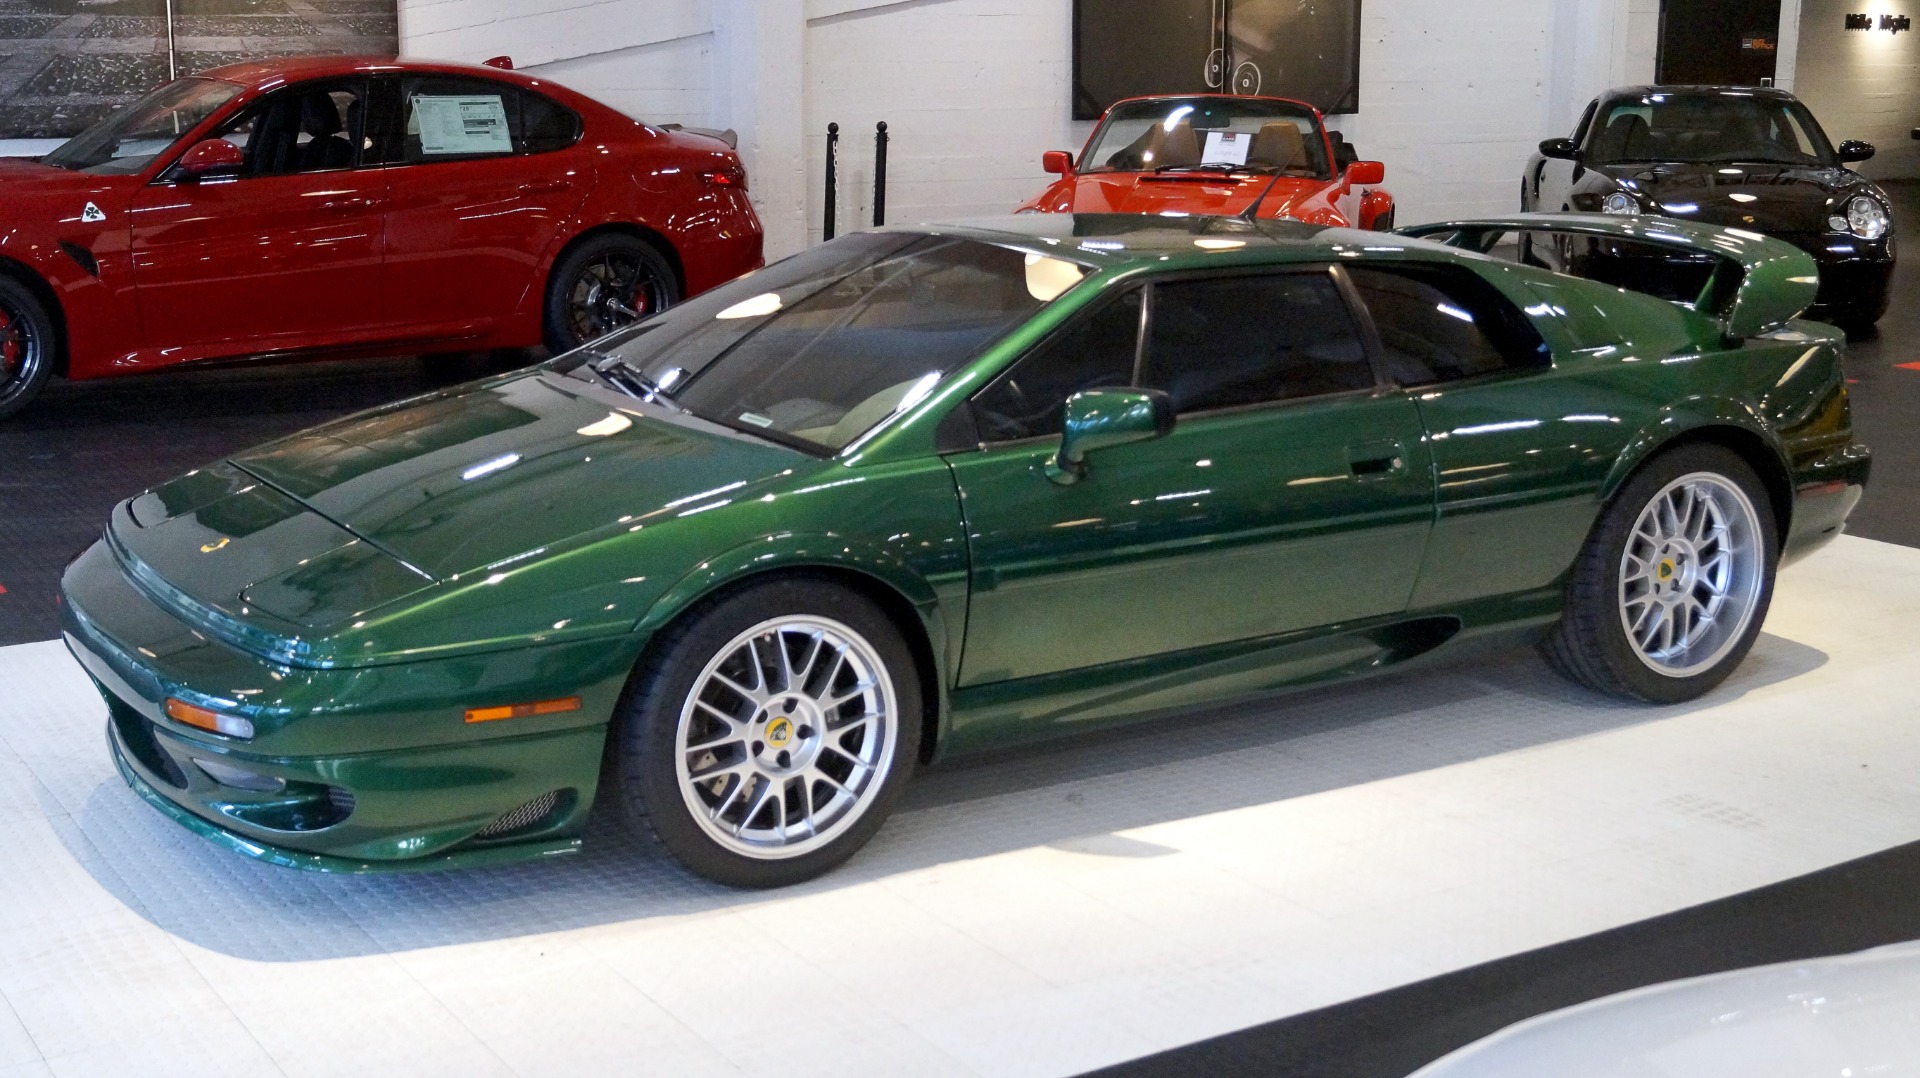 Used 2004 Lotus Esprit V8 Final Edition For Sale ($76,900) | Cars Dawydiak  Stock #171101C